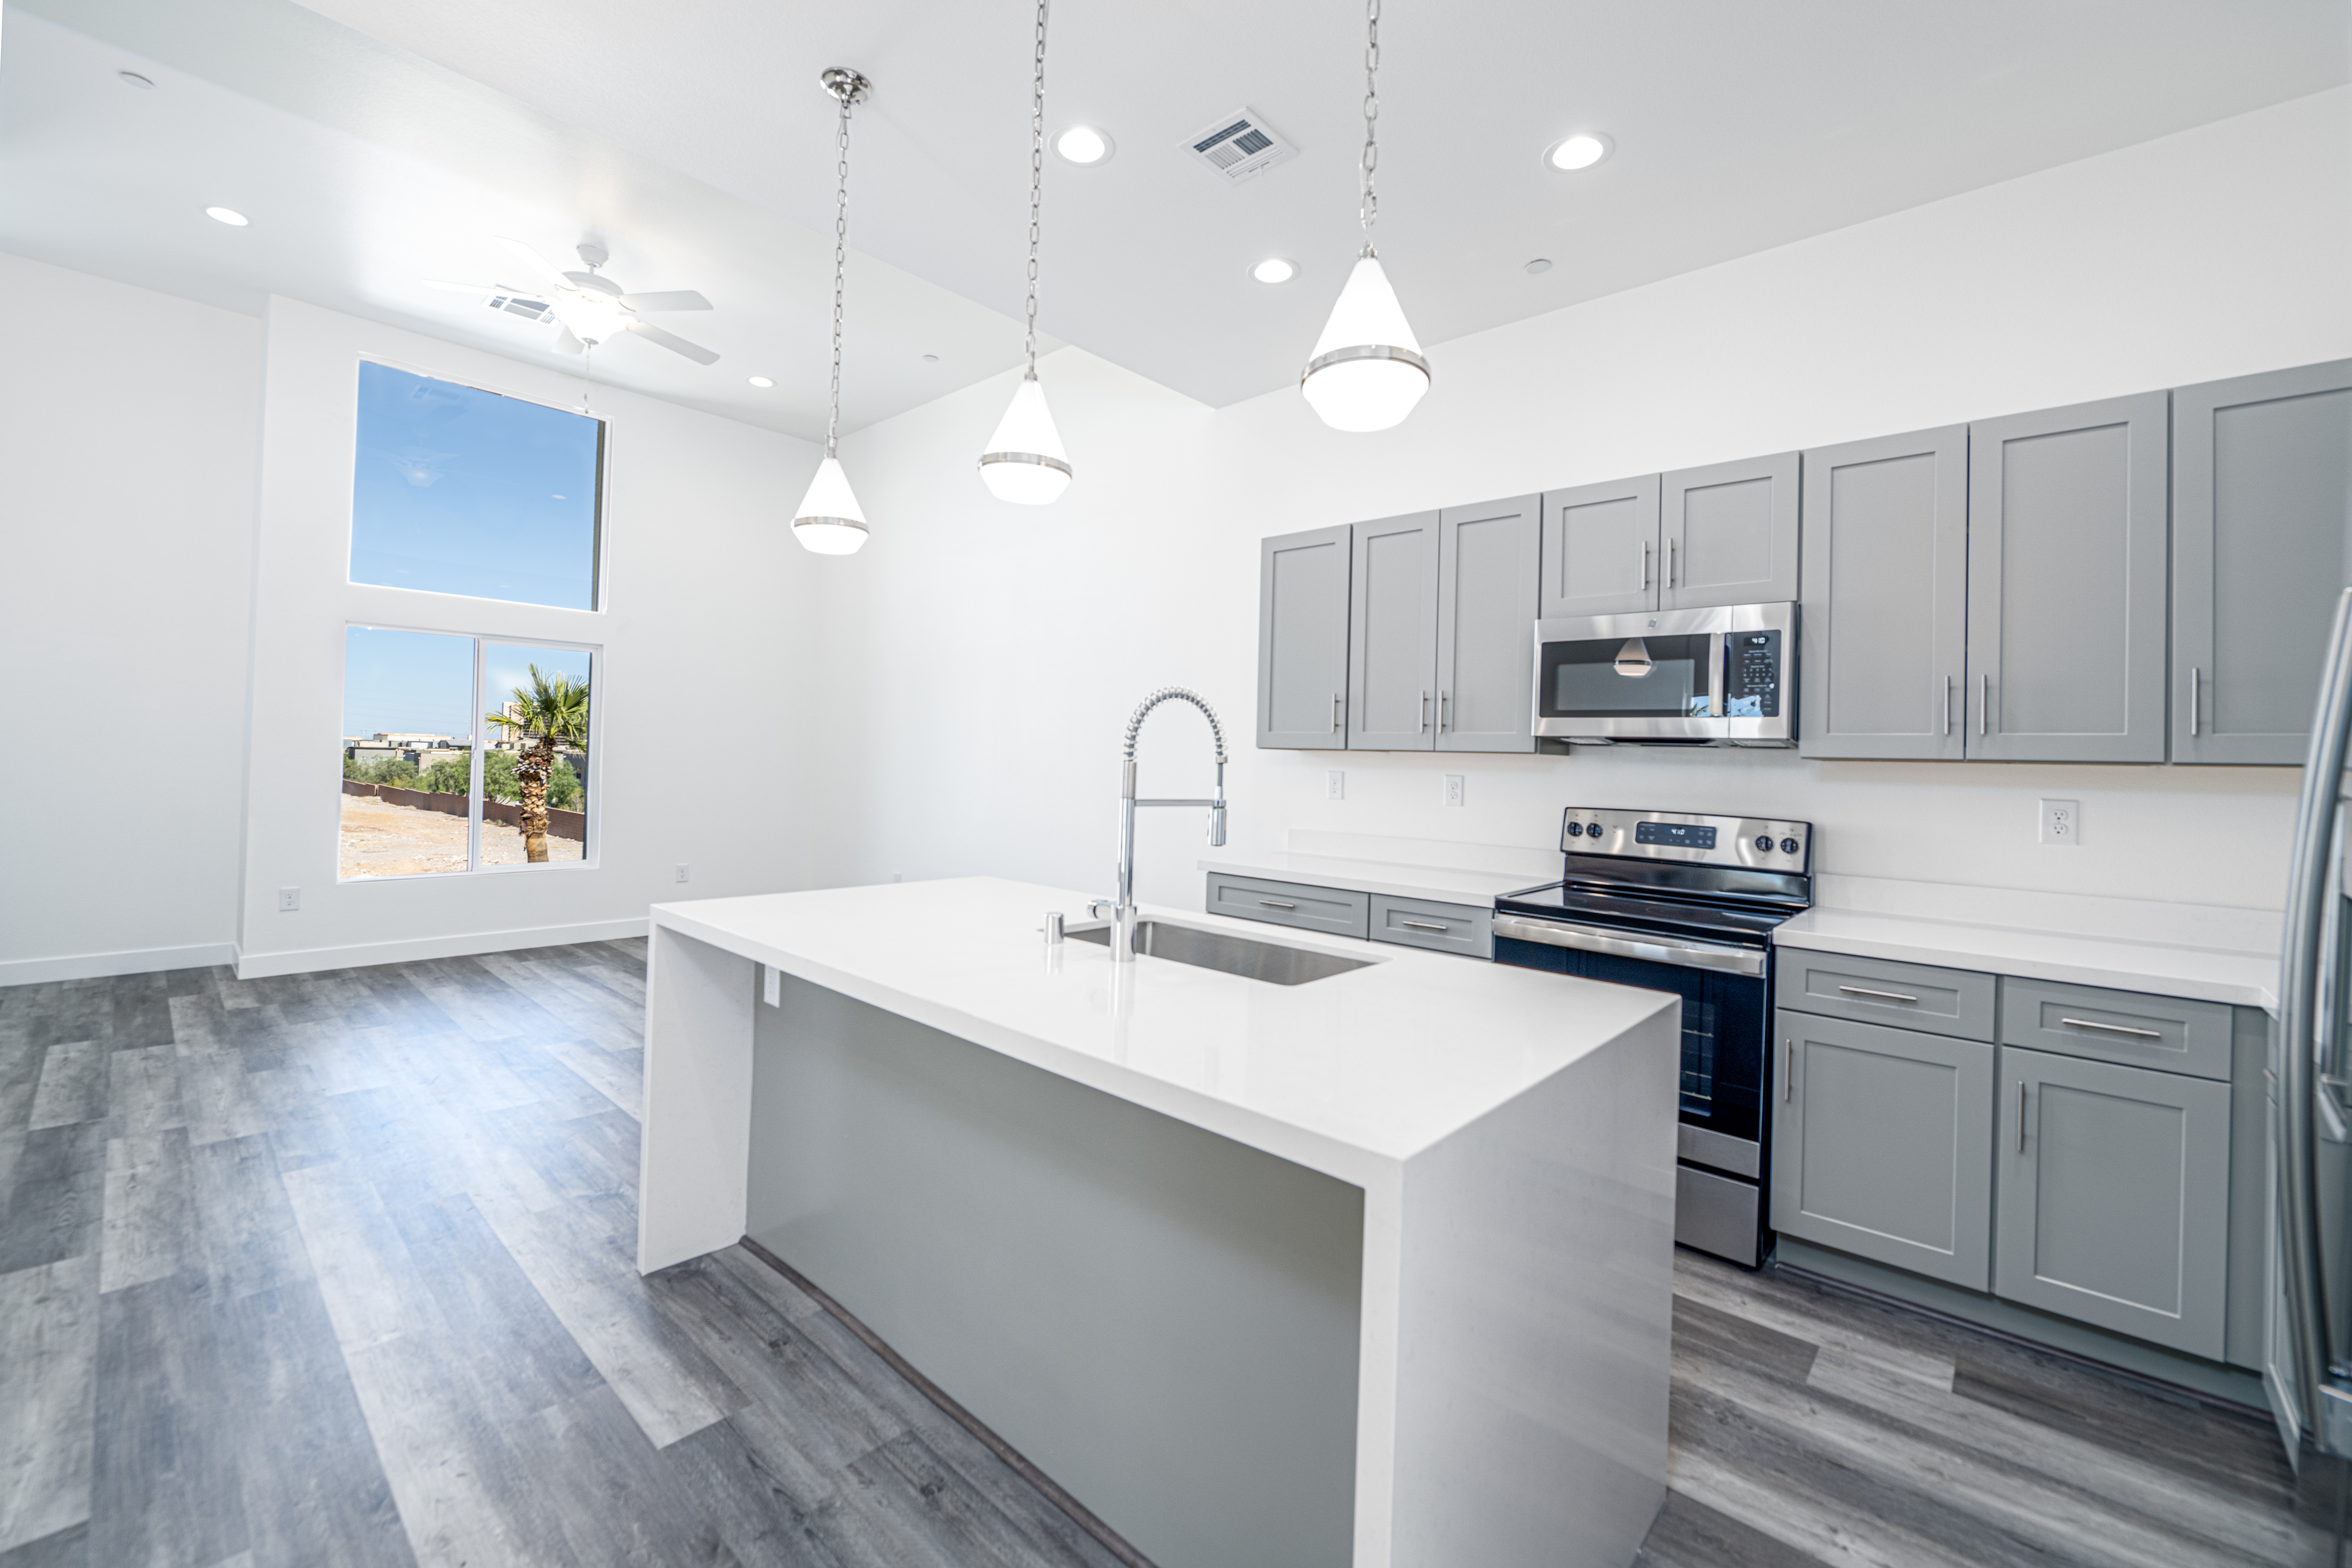 Kitchen of Unit C at Thrive by Edward Homes